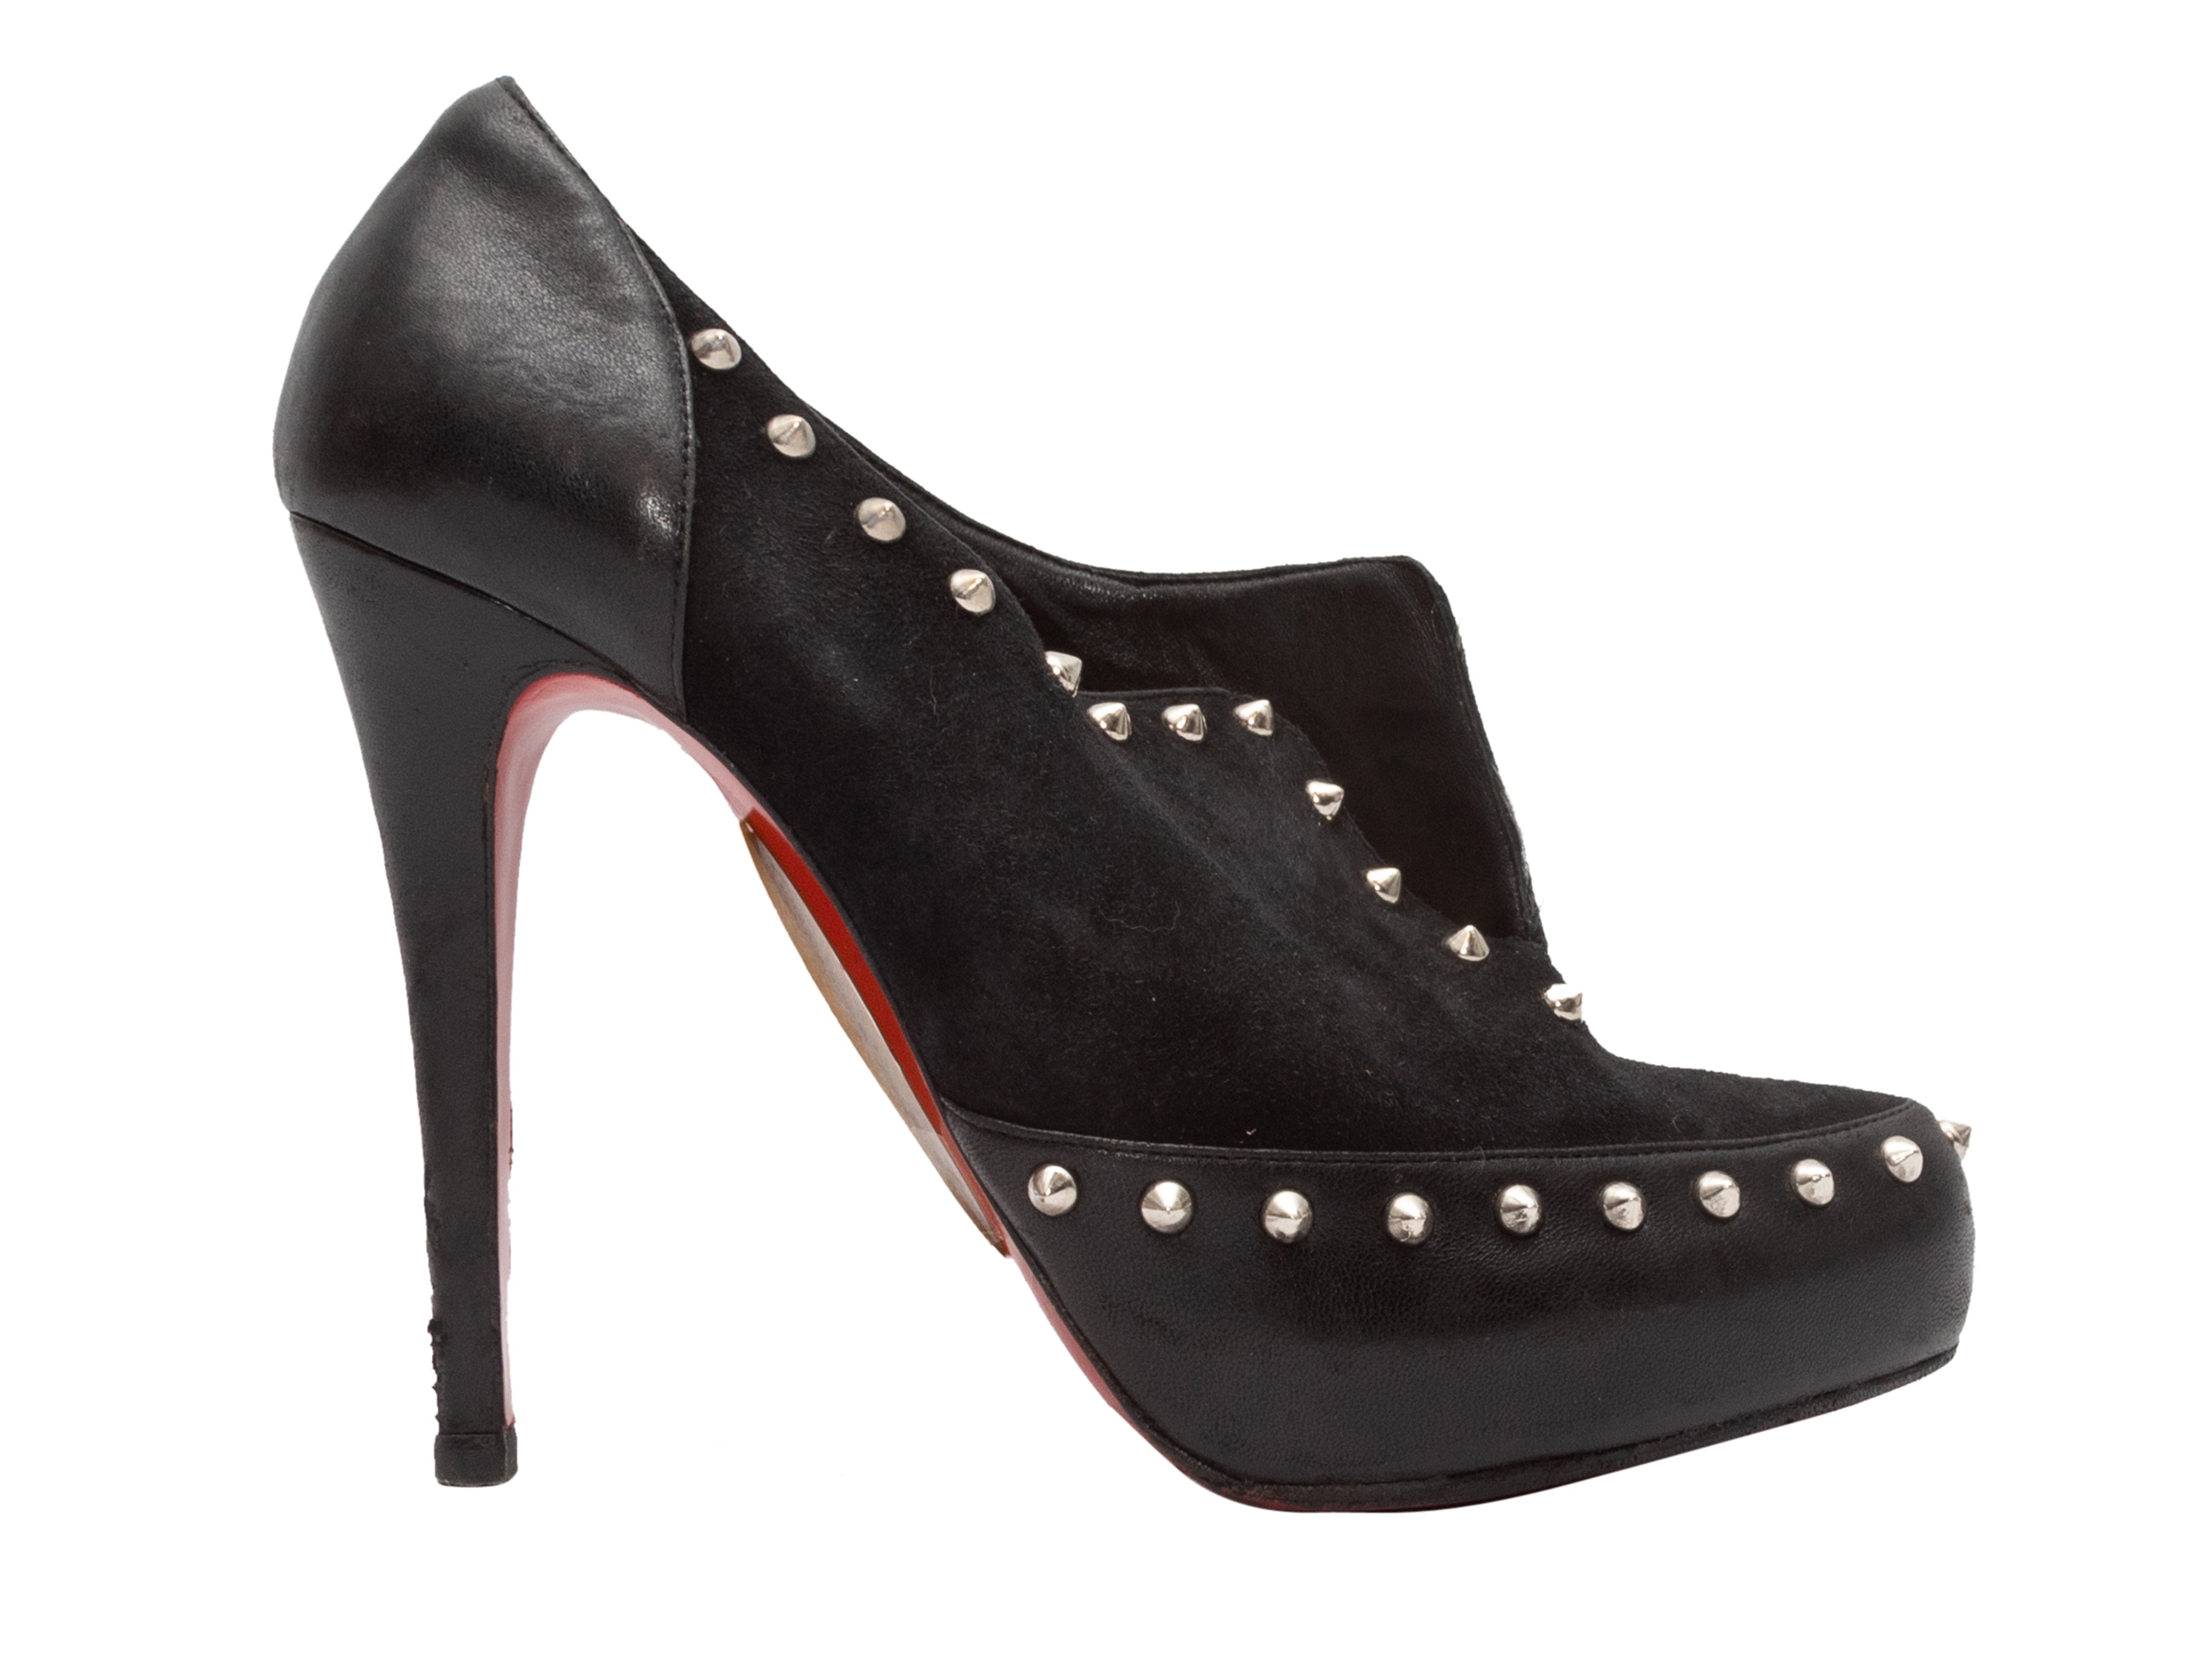 Christian Louboutin Authenticated Suede Boots